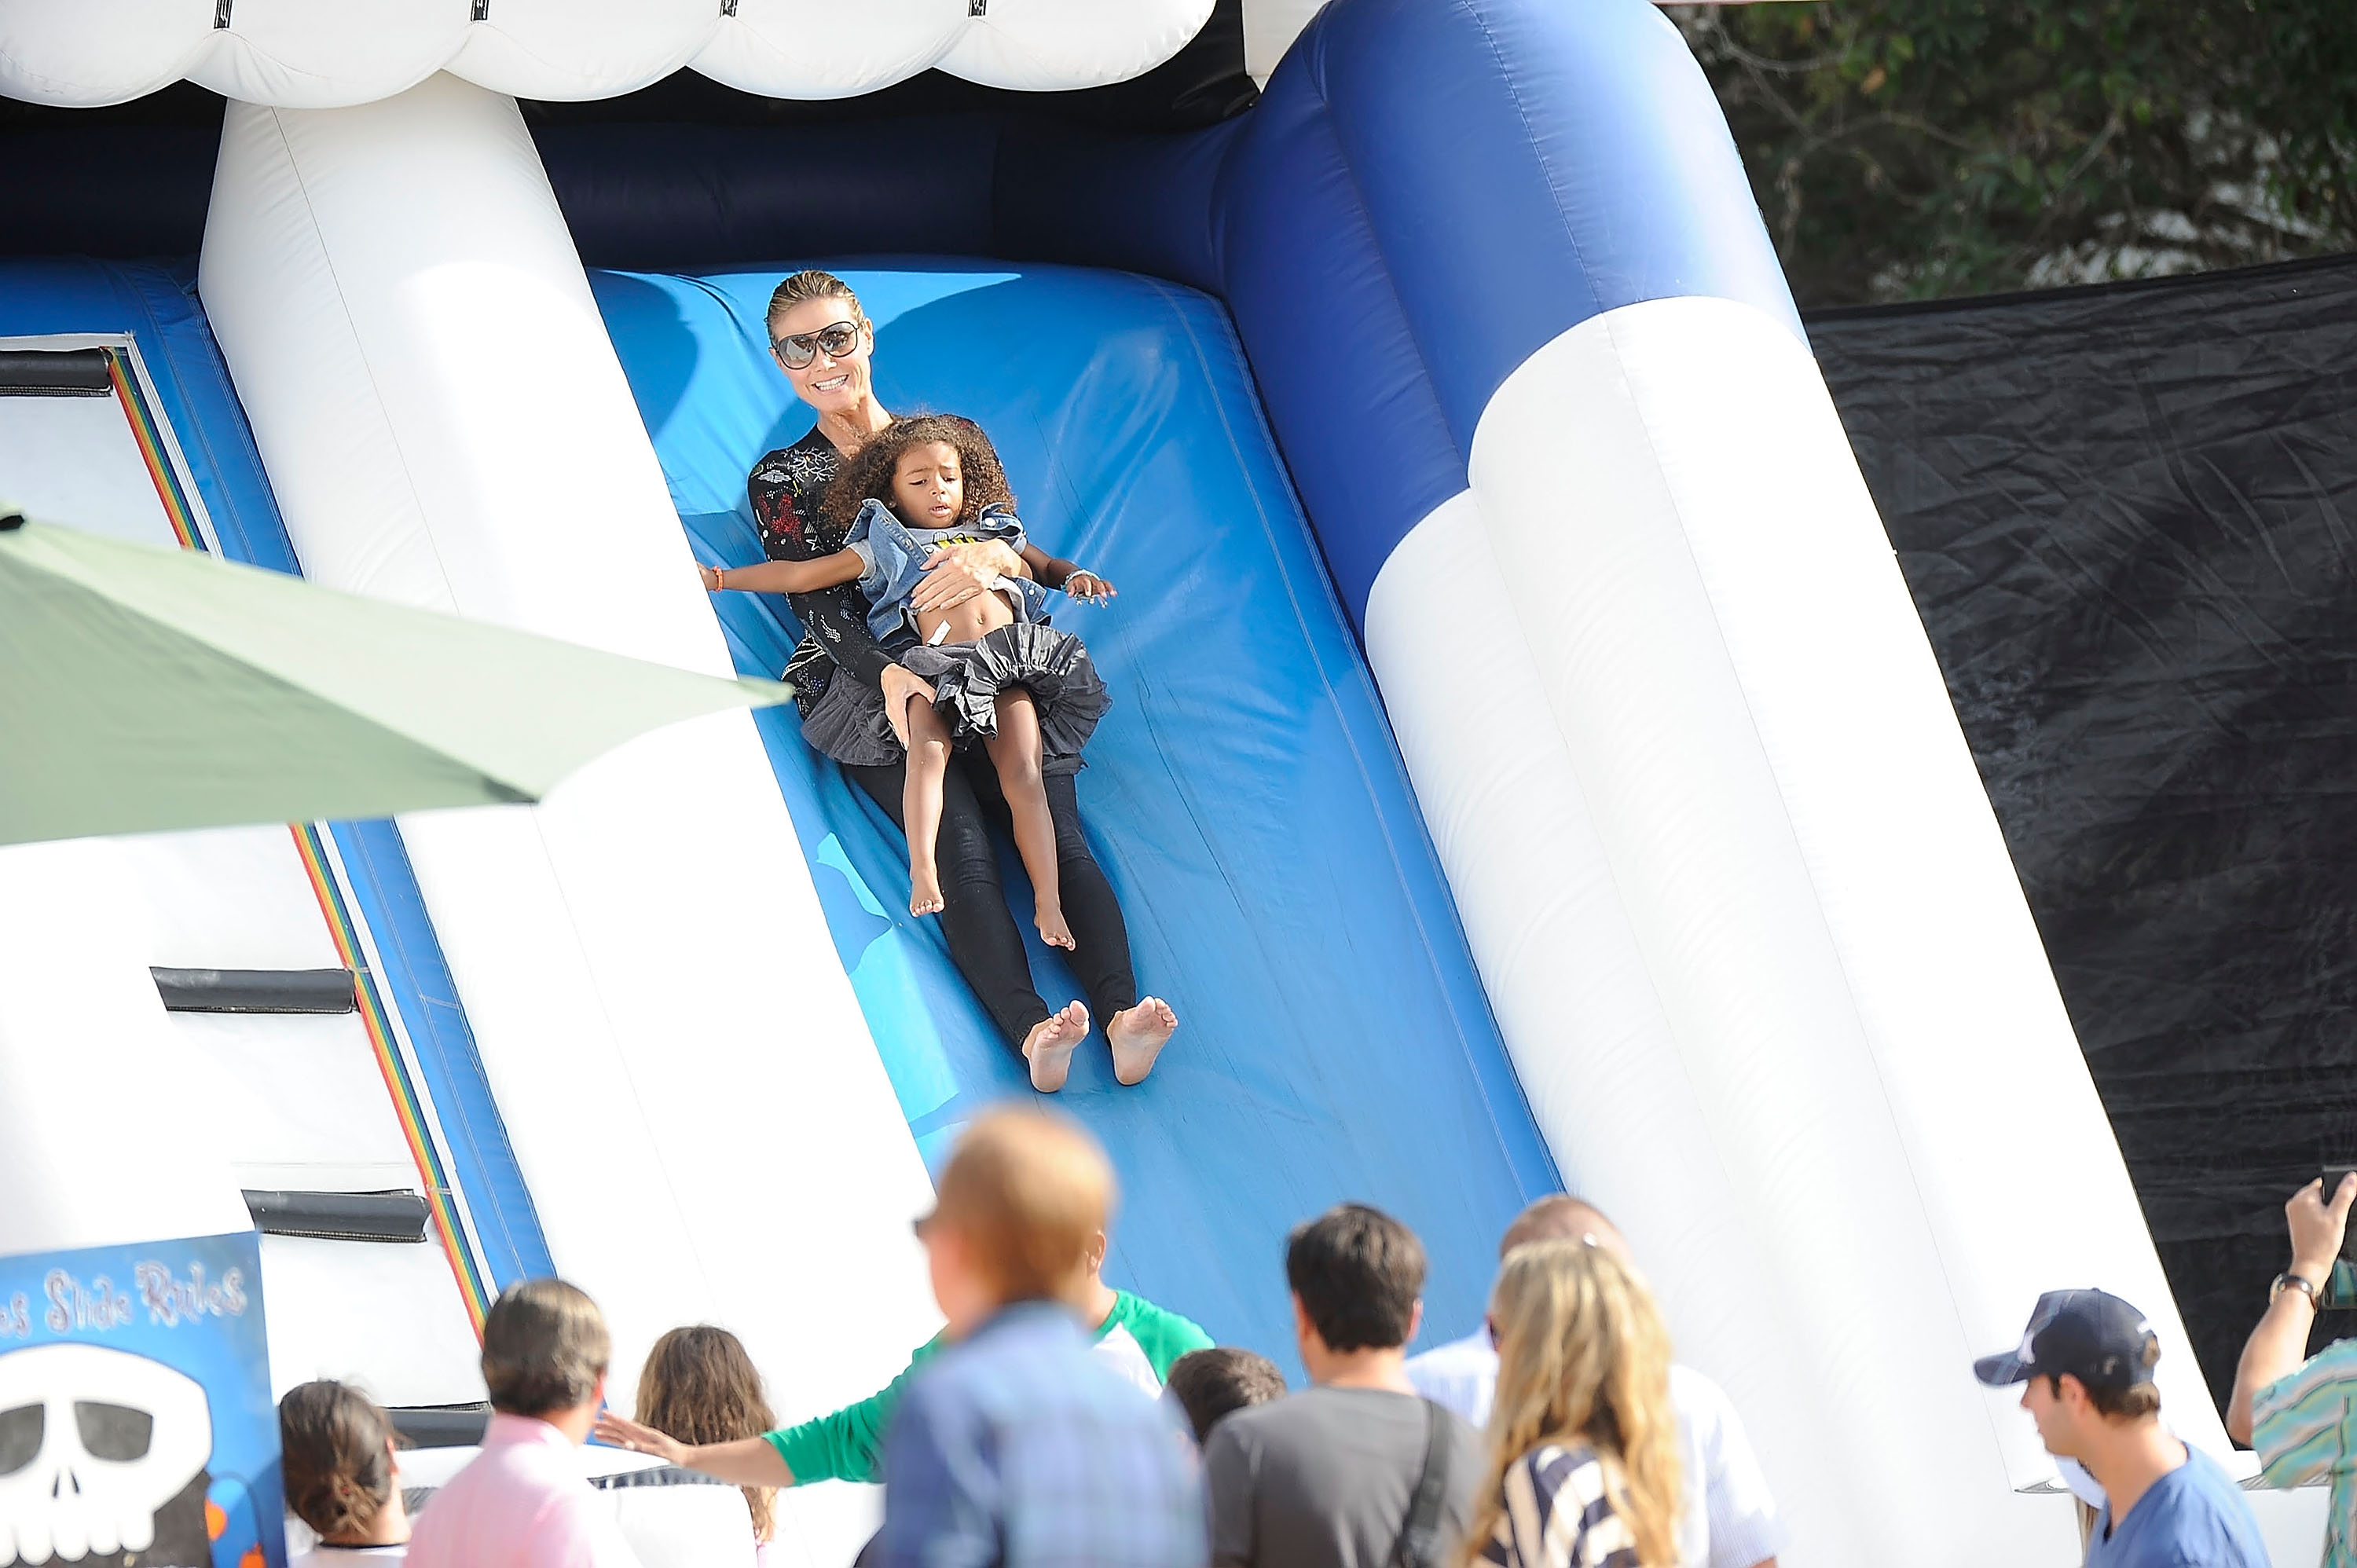 Heidi Klum seen going down a jumping castle slide with her daughter Lou Samuel at the Mr. Bones pumpkin patch on October 6, 2012, in Los Angeles, California. | Source: Getty Images